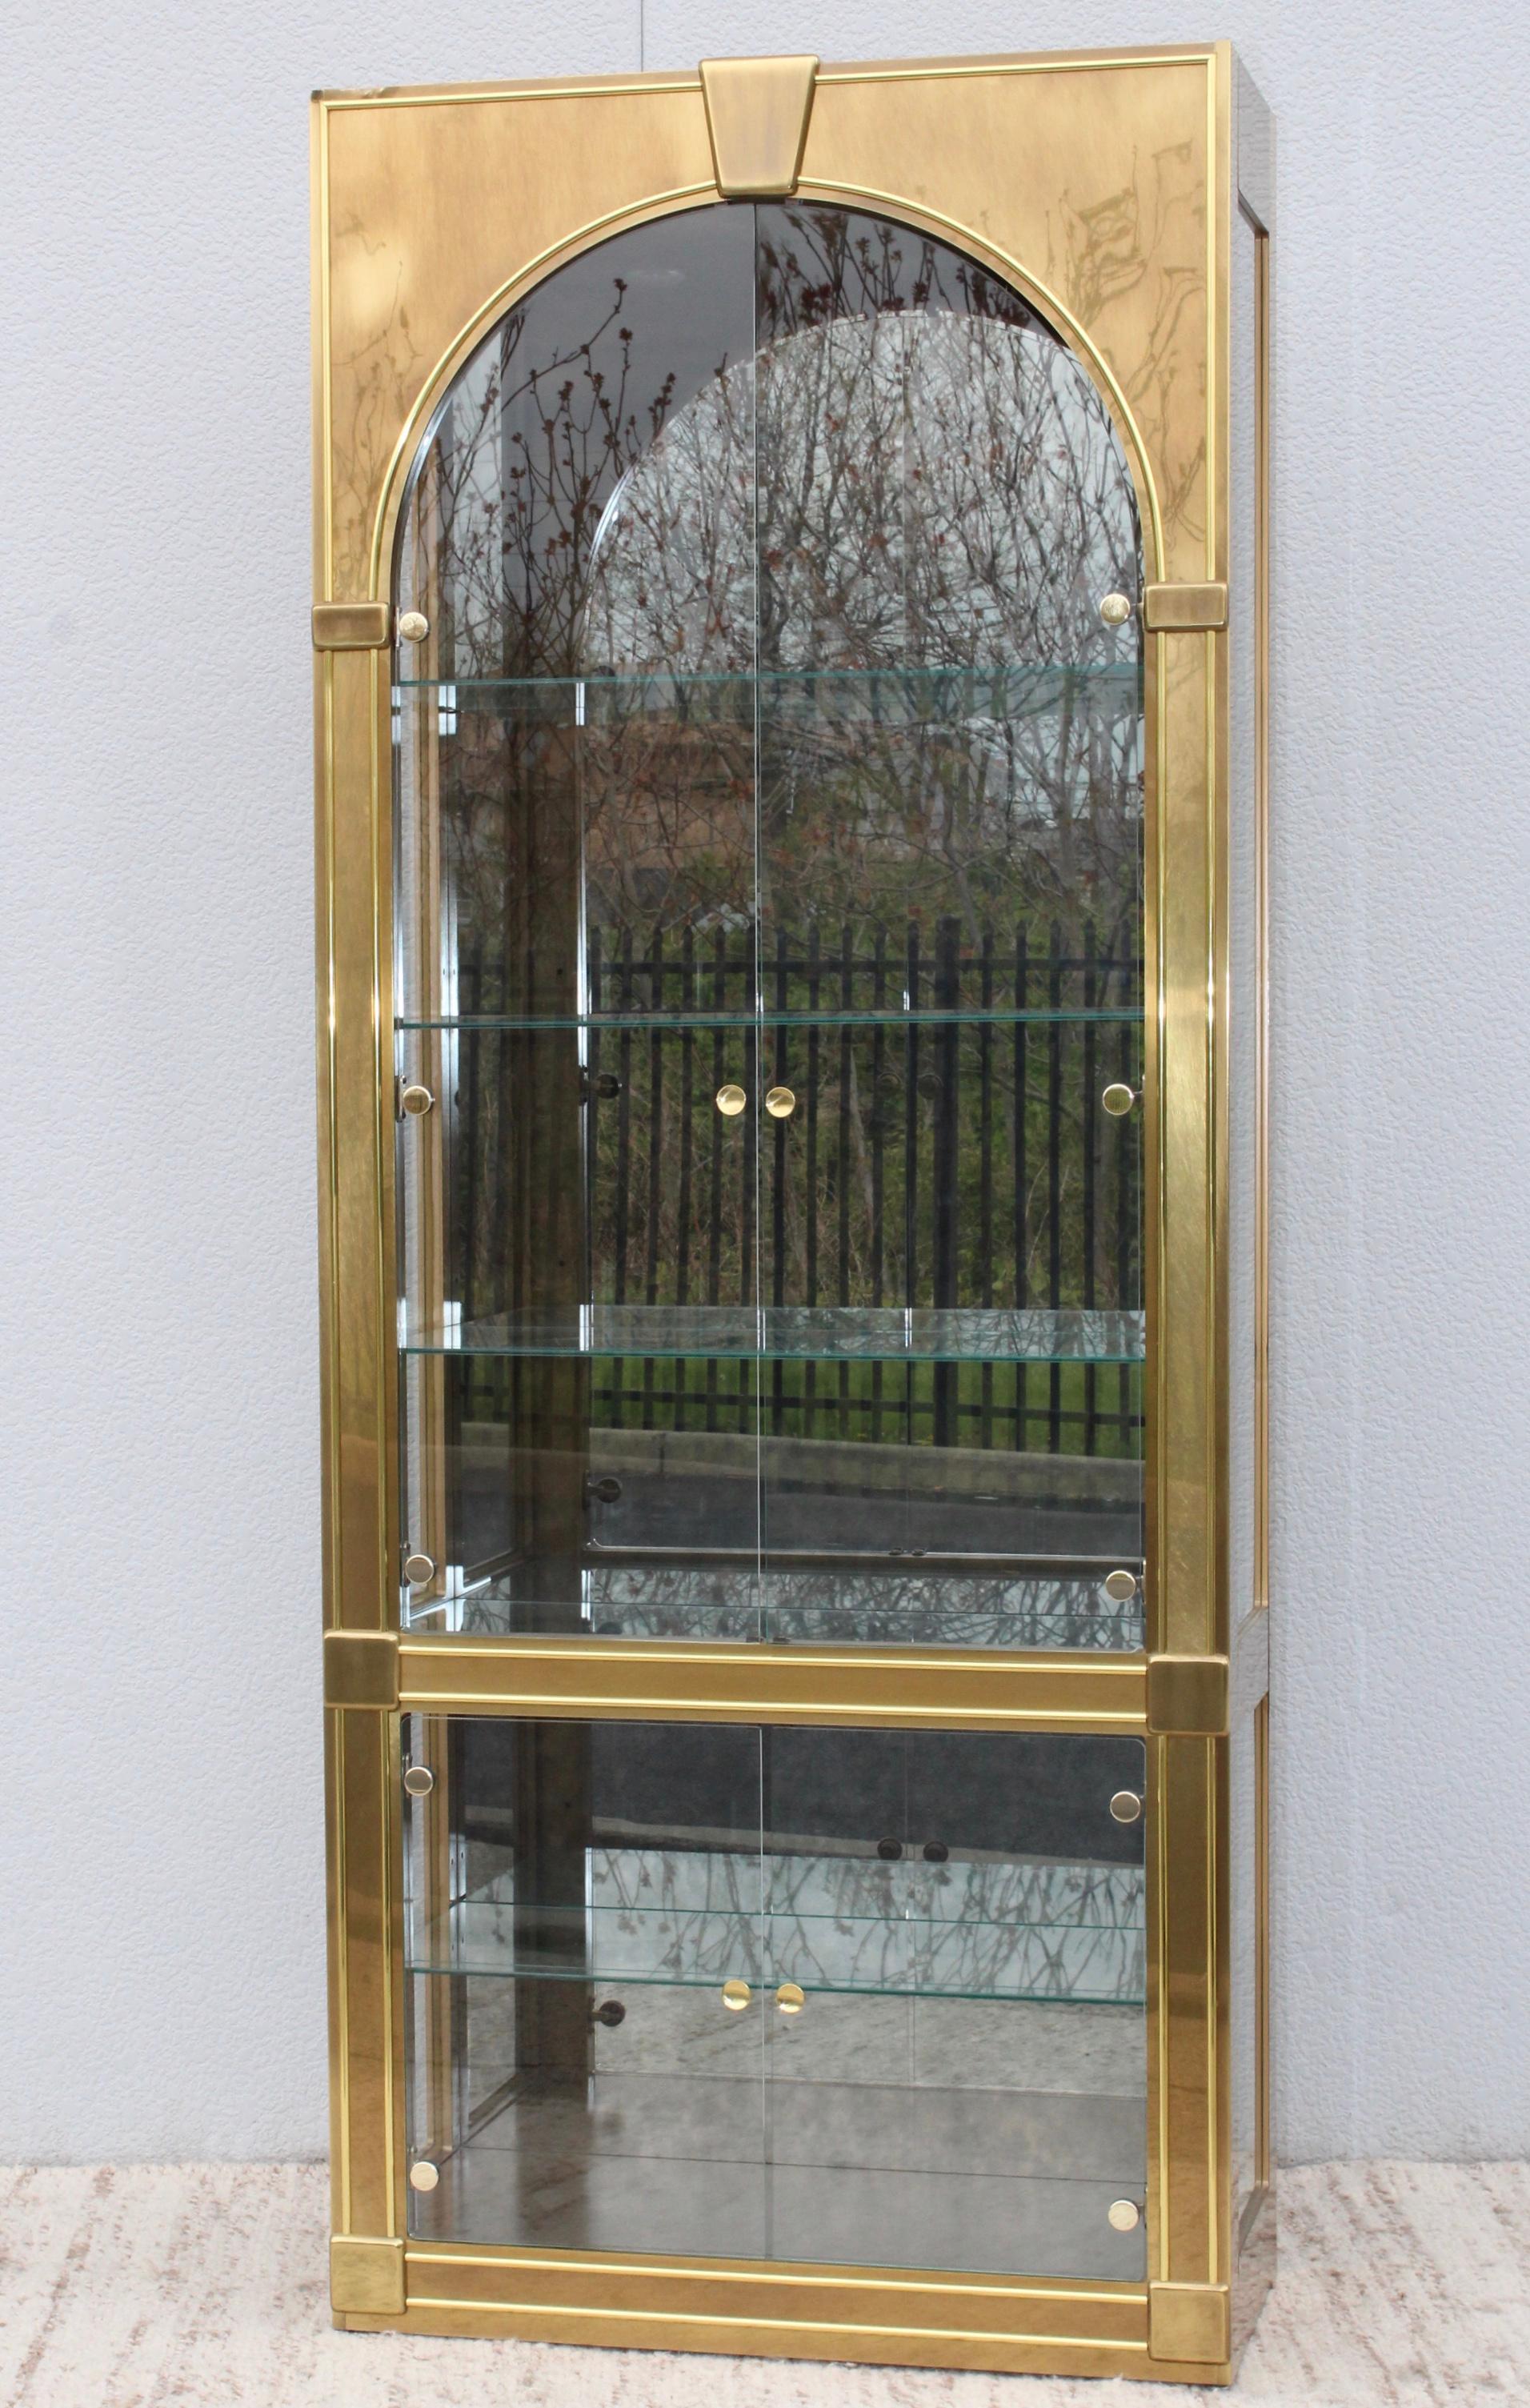 Stunning 1970s Mastercraft brass vitrine with glass shelves and antique mirror inside. In vintage original condition, there is s dent and wear on the upper left side.